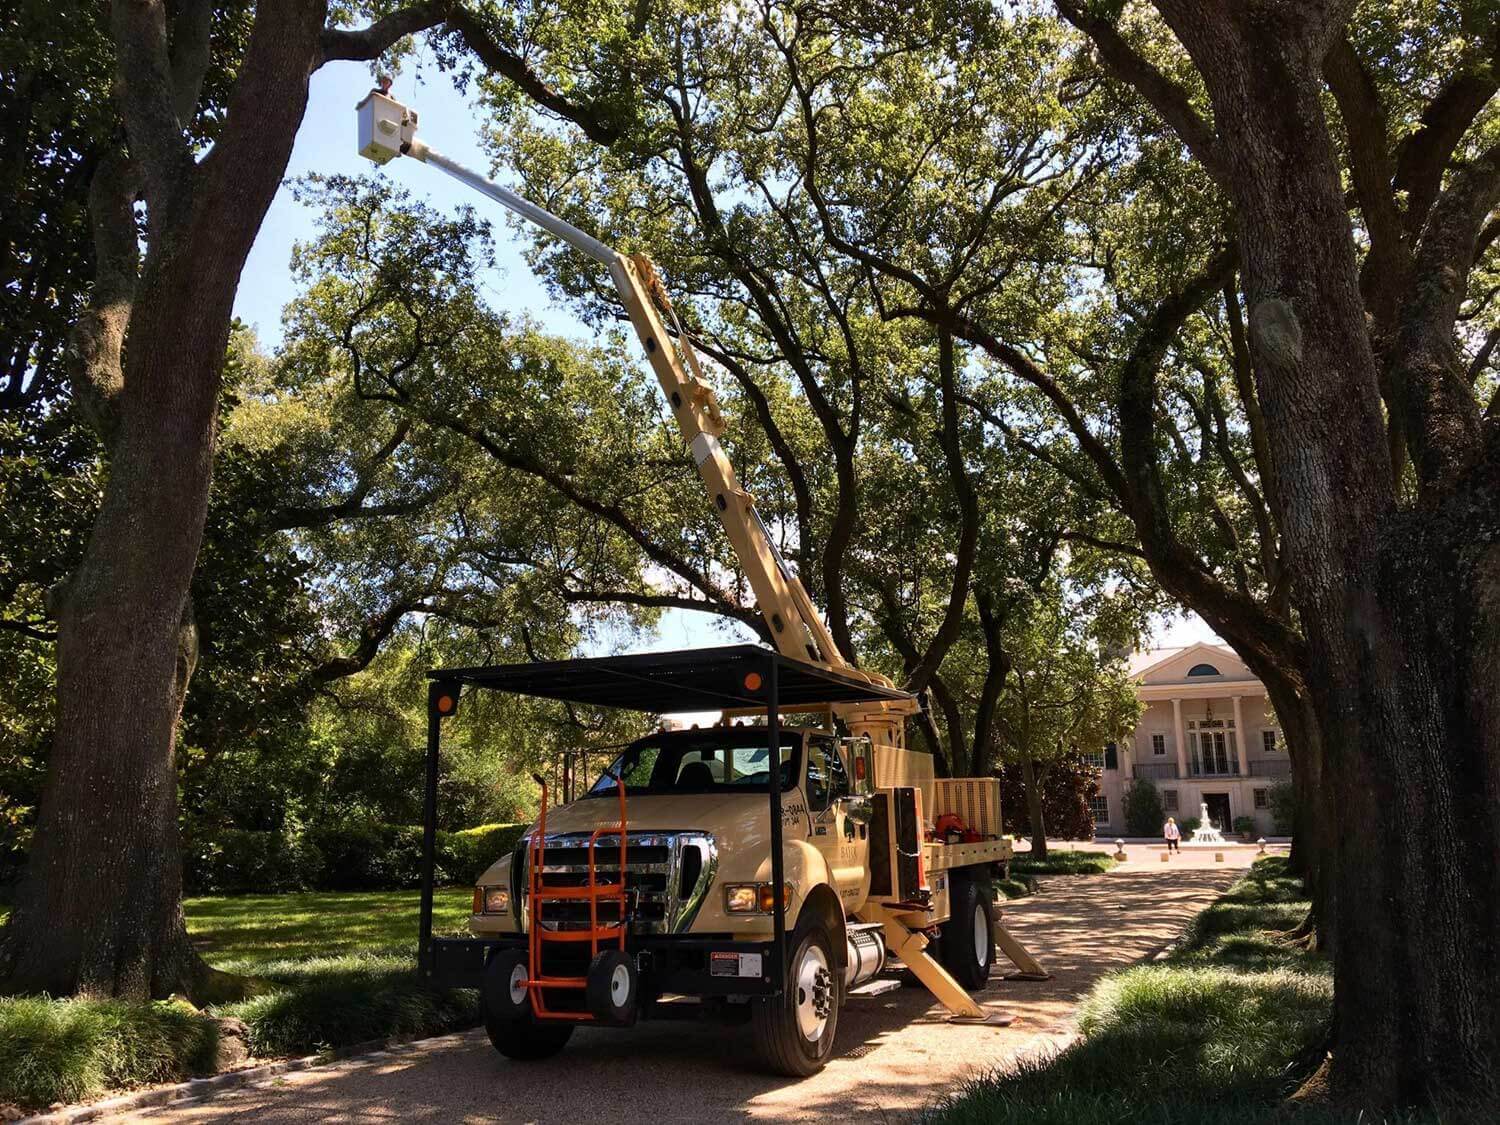 Commercial Tree Services-Delray Beach Tree Trimming and Tree Removal Services-We Offer Tree Trimming Services, Tree Removal, Tree Pruning, Tree Cutting, Residential and Commercial Tree Trimming Services, Storm Damage, Emergency Tree Removal, Land Clearing, Tree Companies, Tree Care Service, Stump Grinding, and we're the Best Tree Trimming Company Near You Guaranteed!